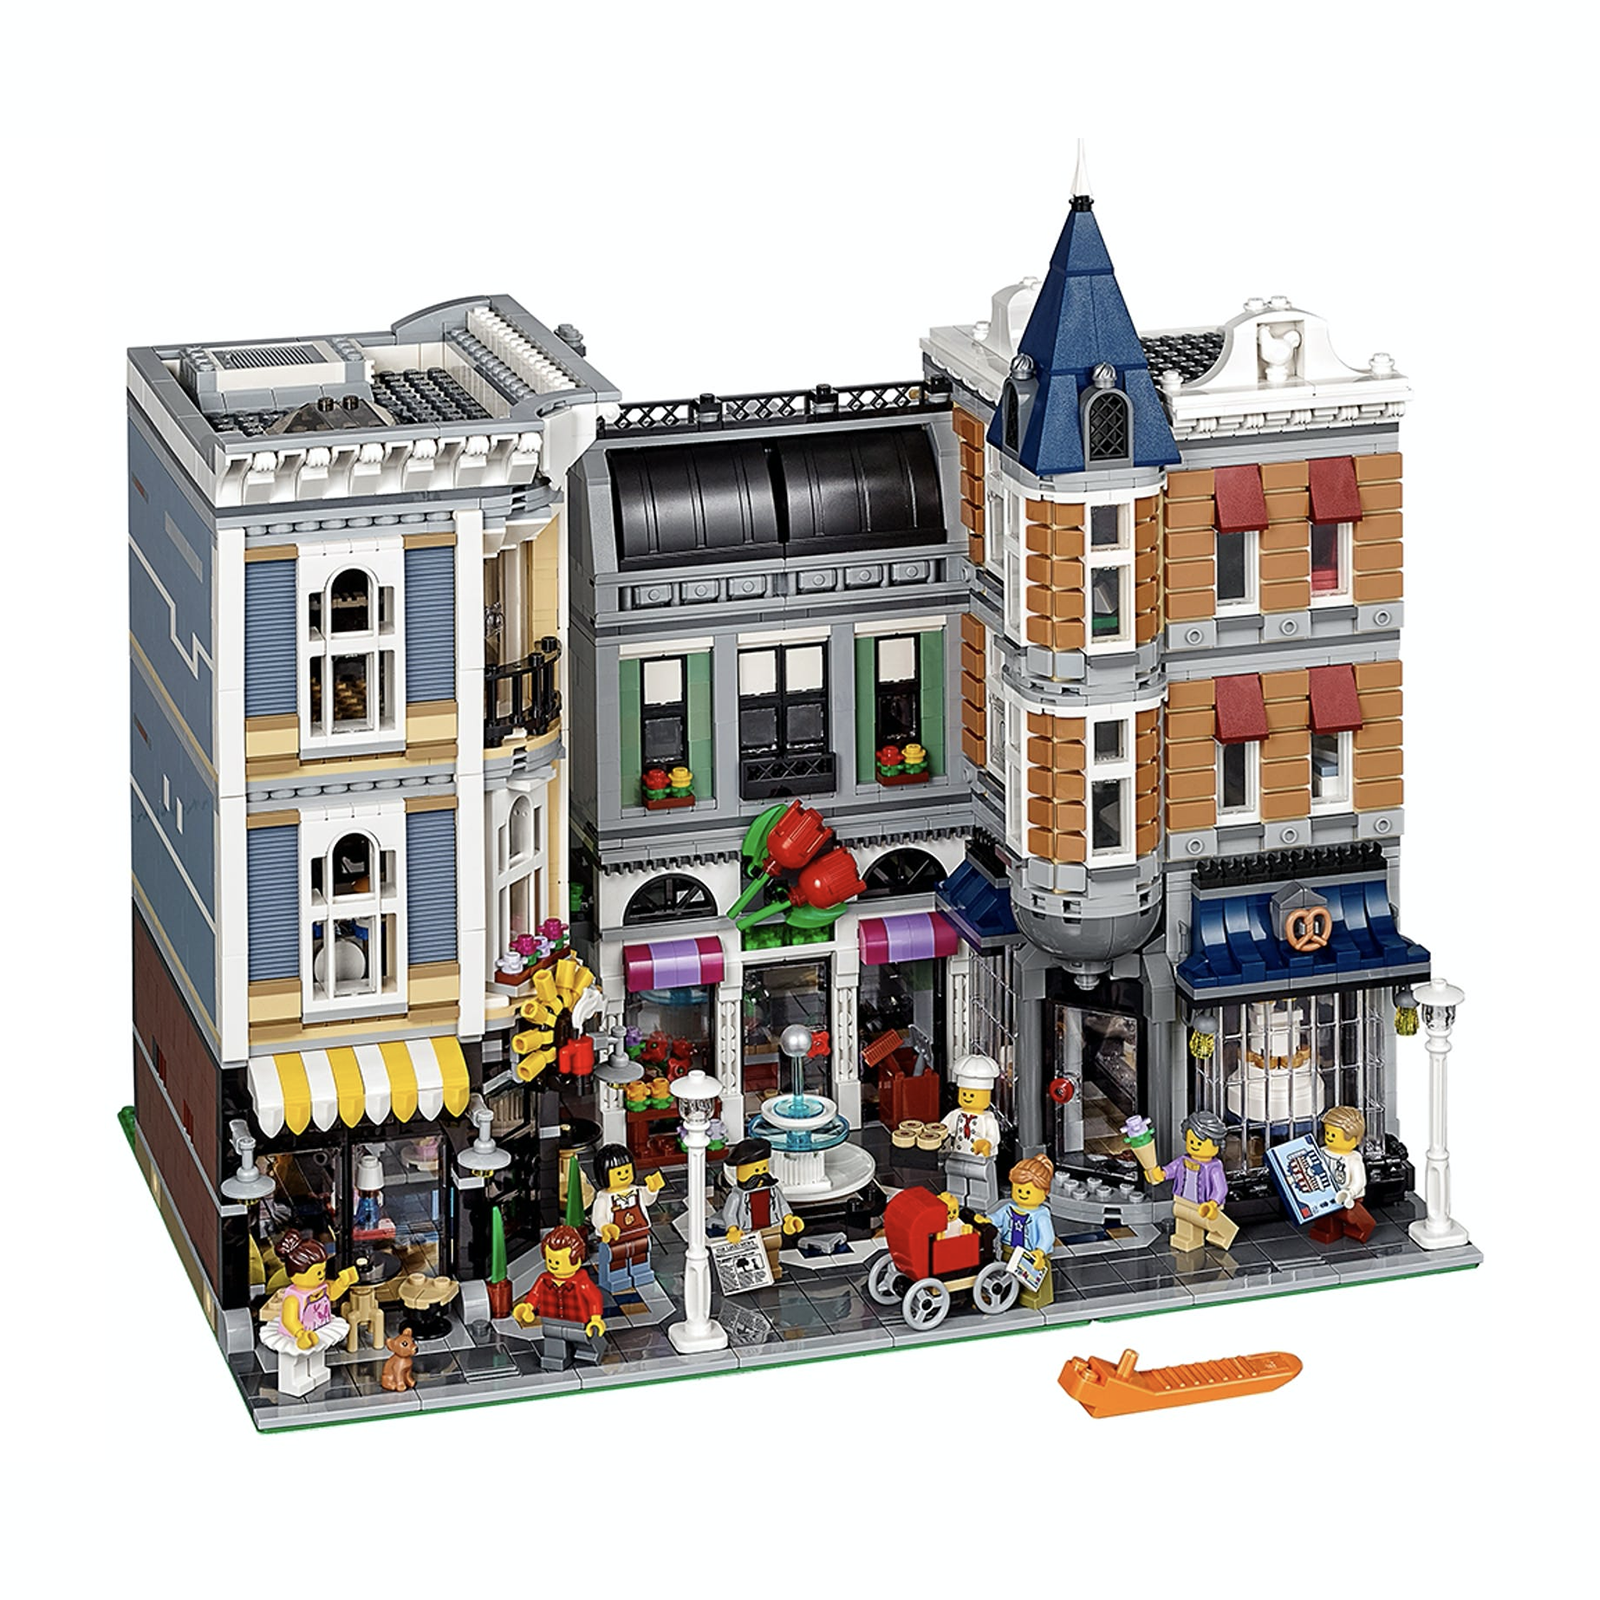 10255 Creator Assembly Square